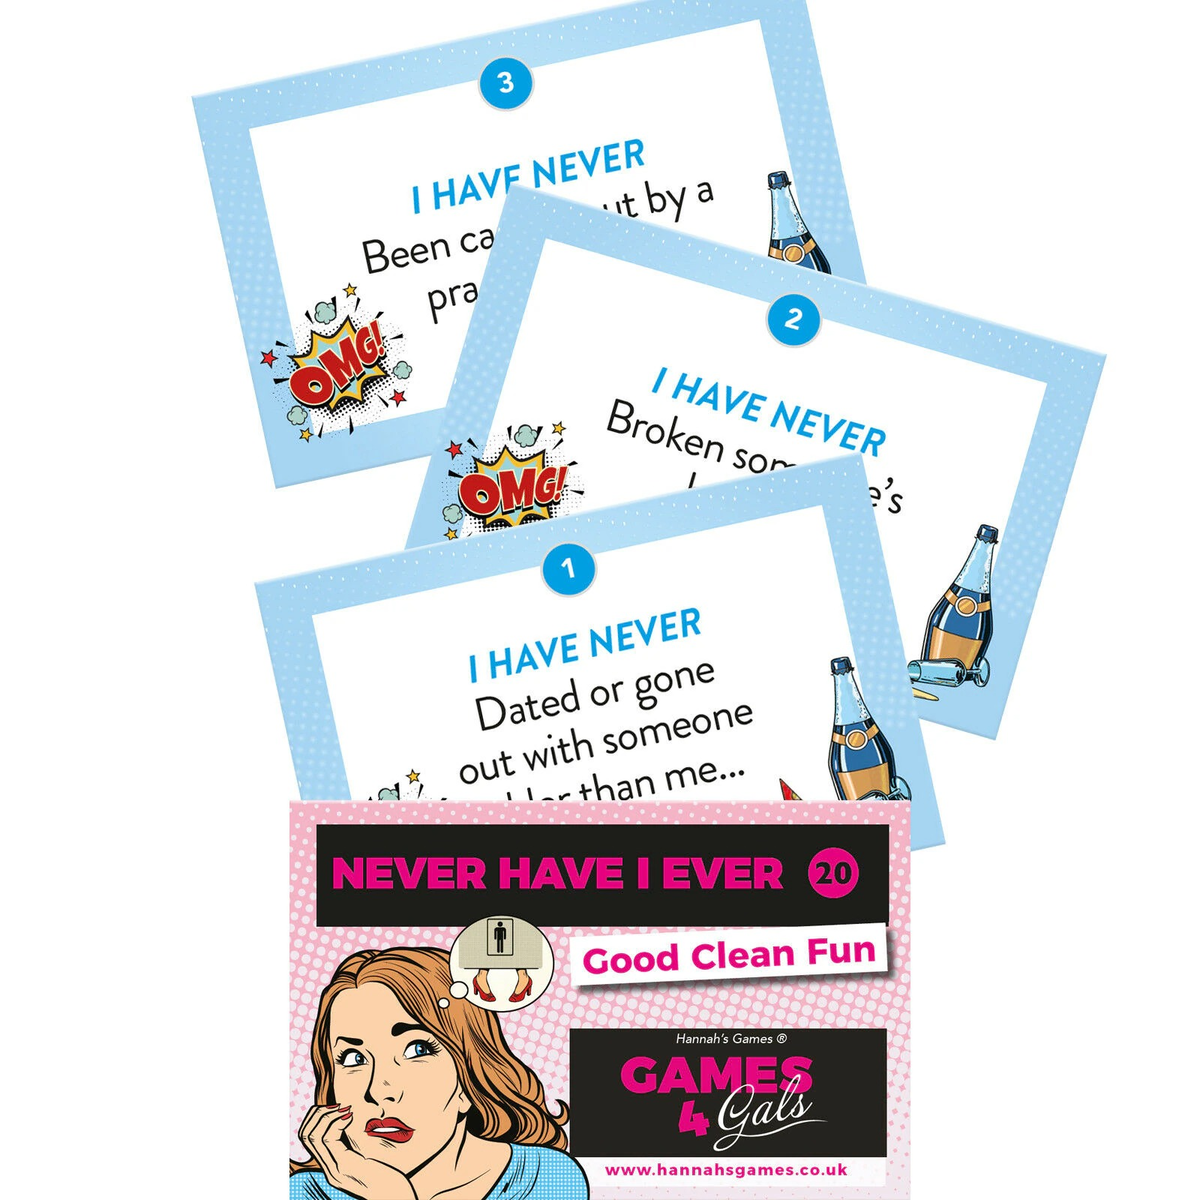 "Never Have I Ever" Fun Game for Adults / Board Game for Parties - EVE's SECRETS